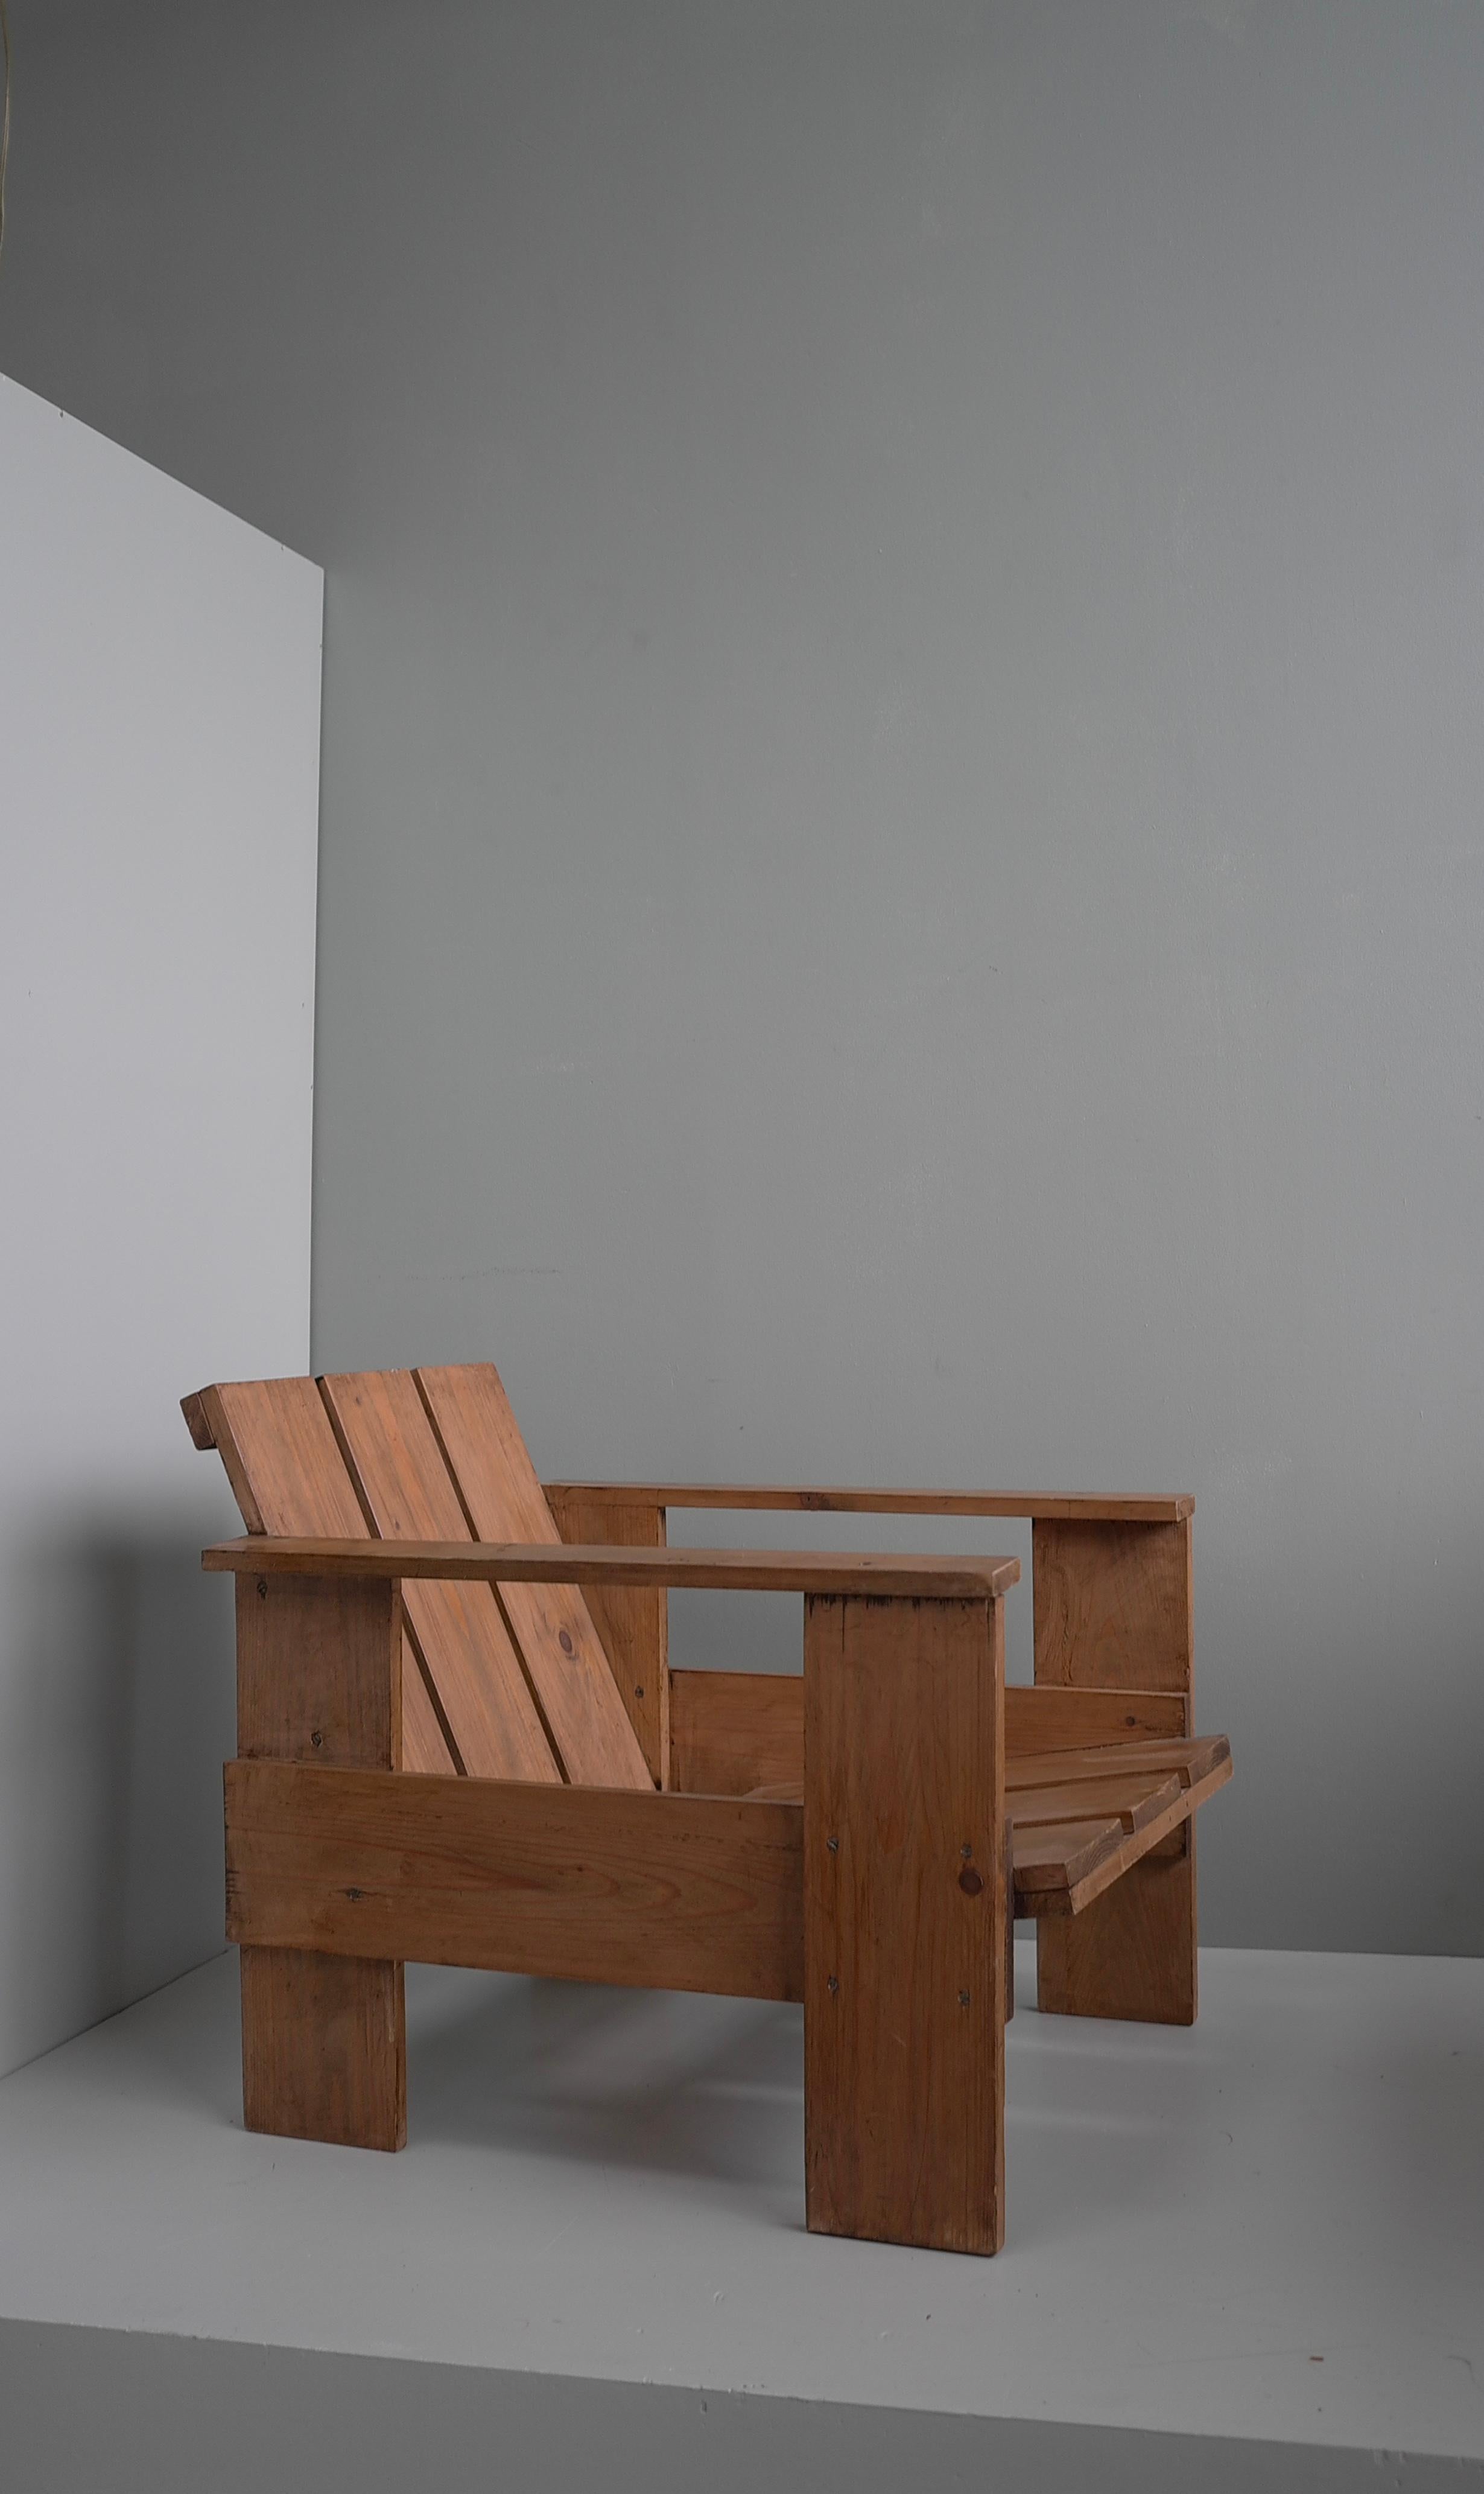 Crate Chair in style of Gerrit Rietveld, The Netherlands 1960's For Sale 3